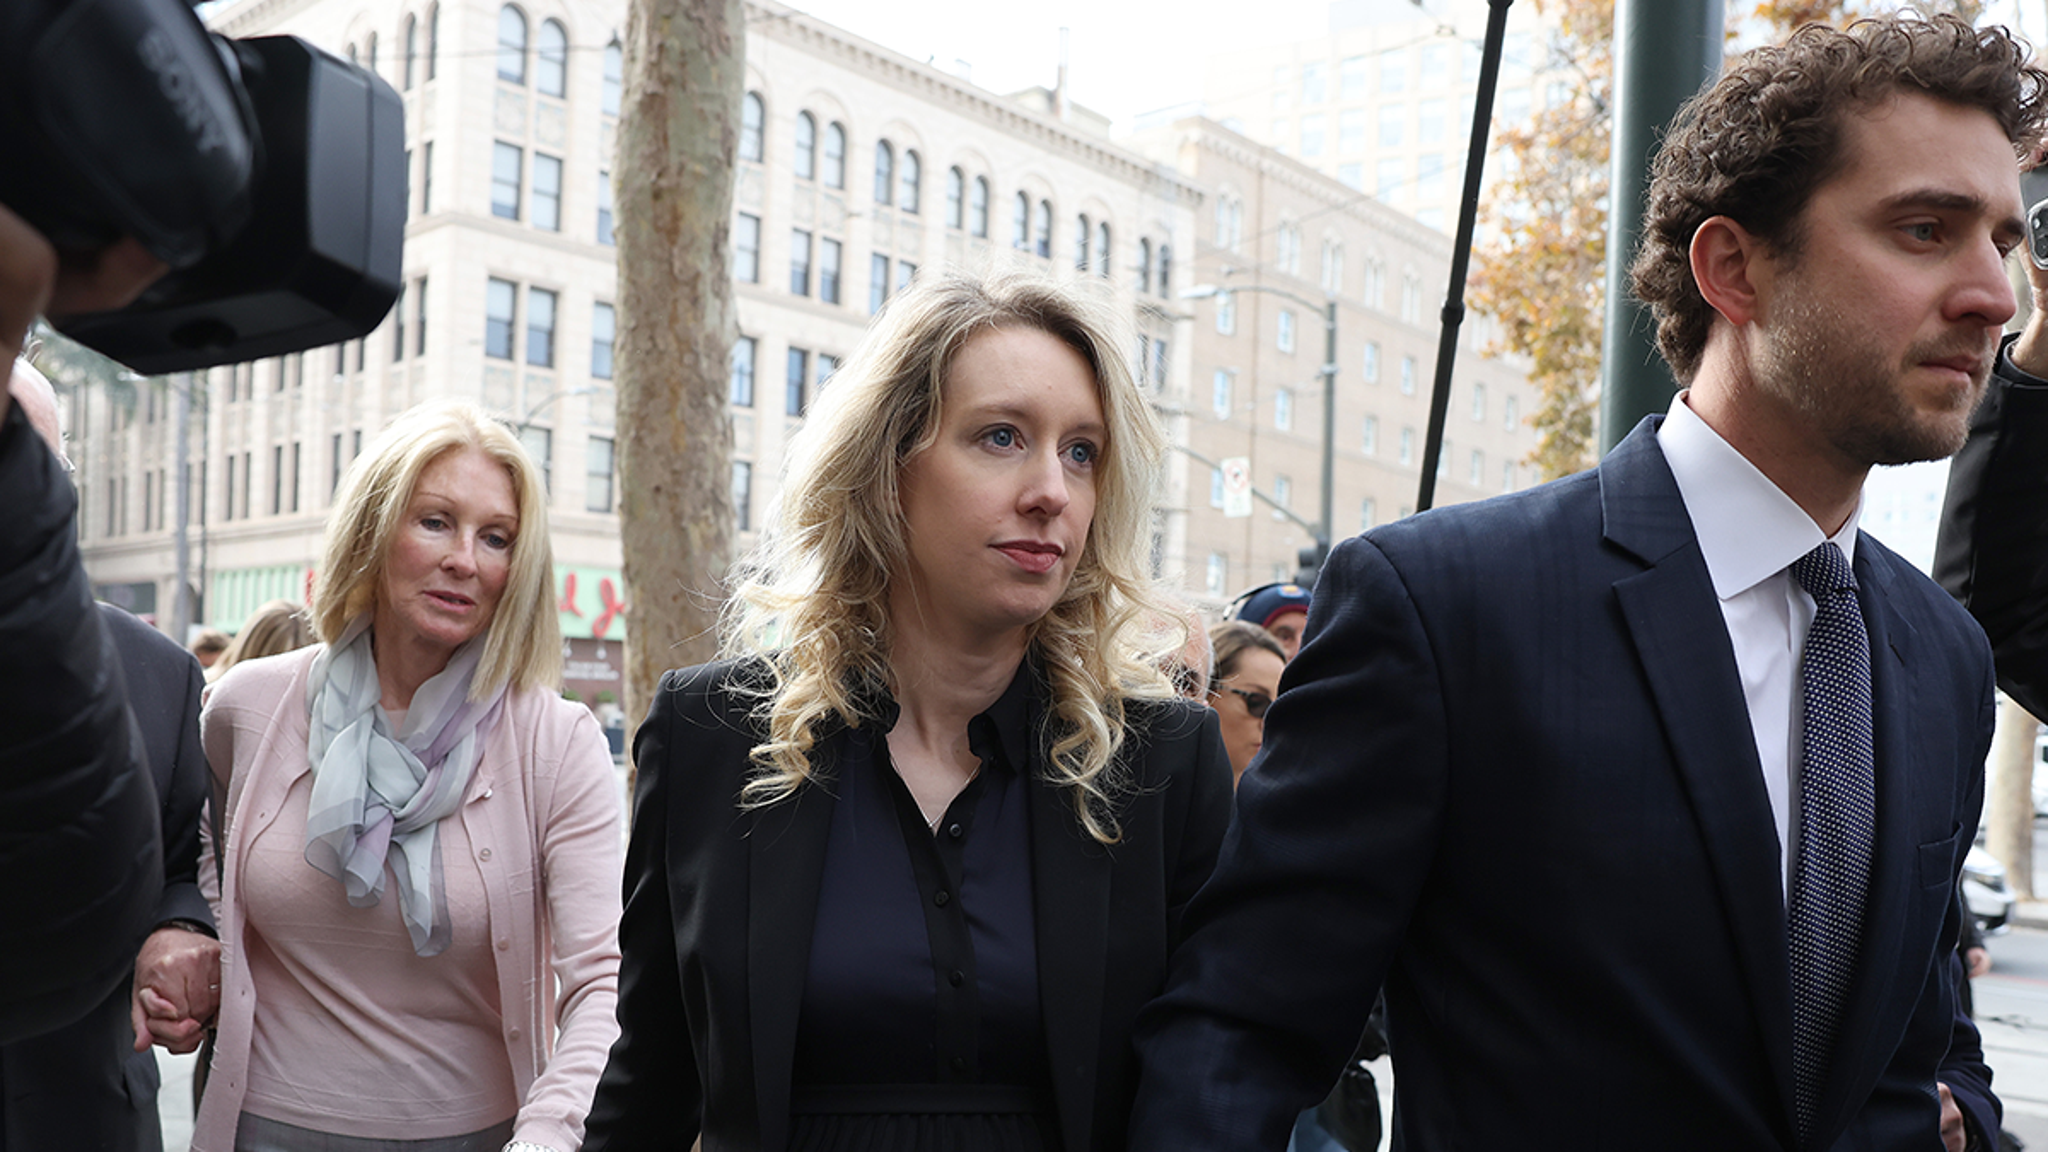 Elizabeth Holmes, founder of Theranos, sentenced to 11 years in prison in a fraud trial